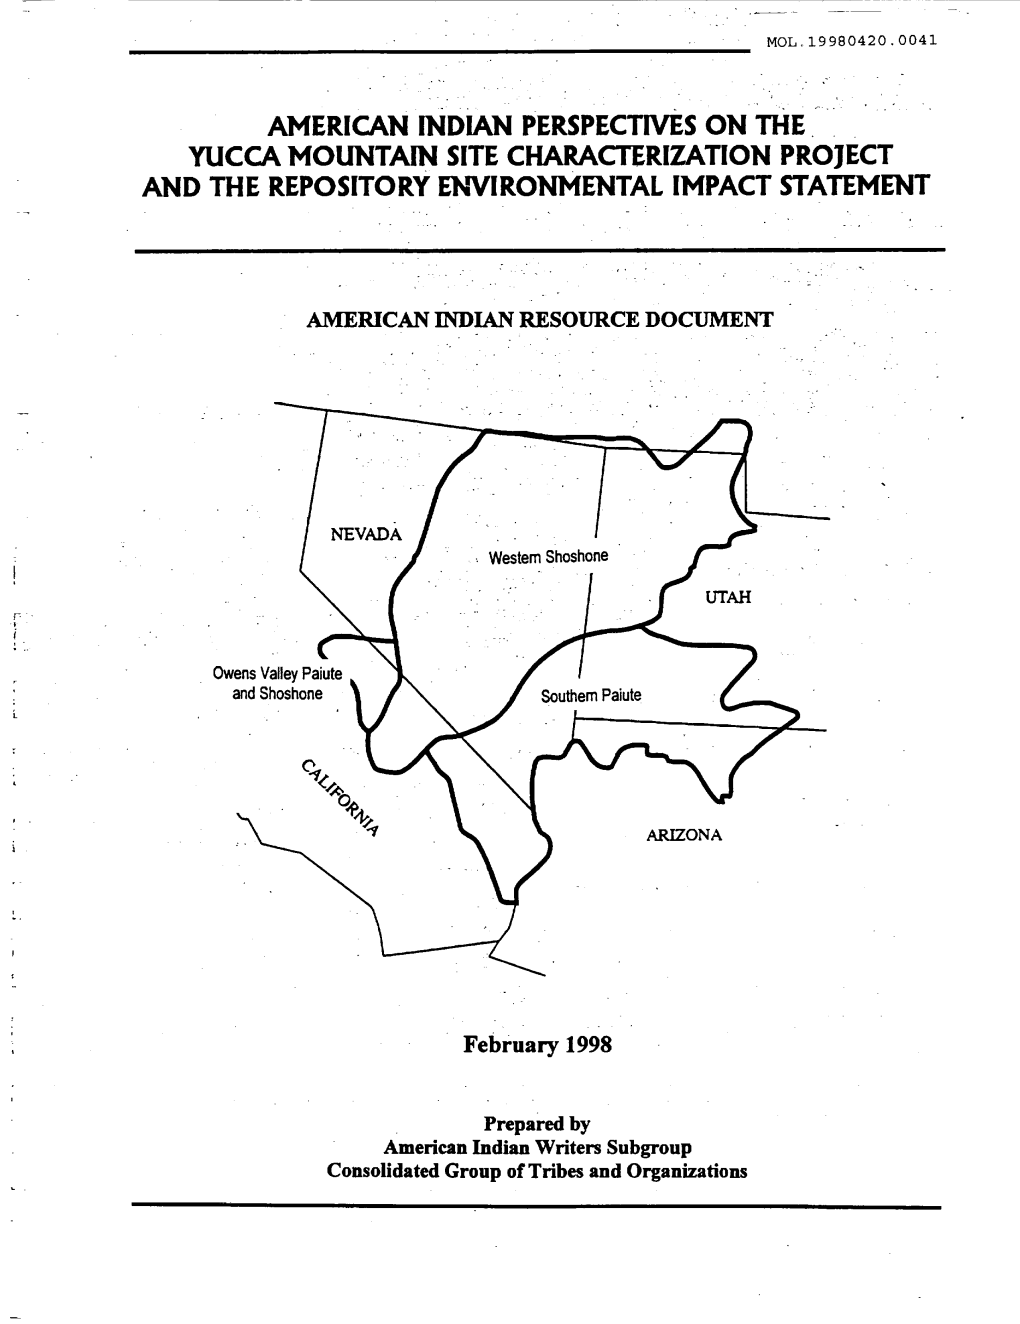 American Indian Perspectives on the Yucca Mountain Site Characterization Project and the Repository Environmental Impact Statement